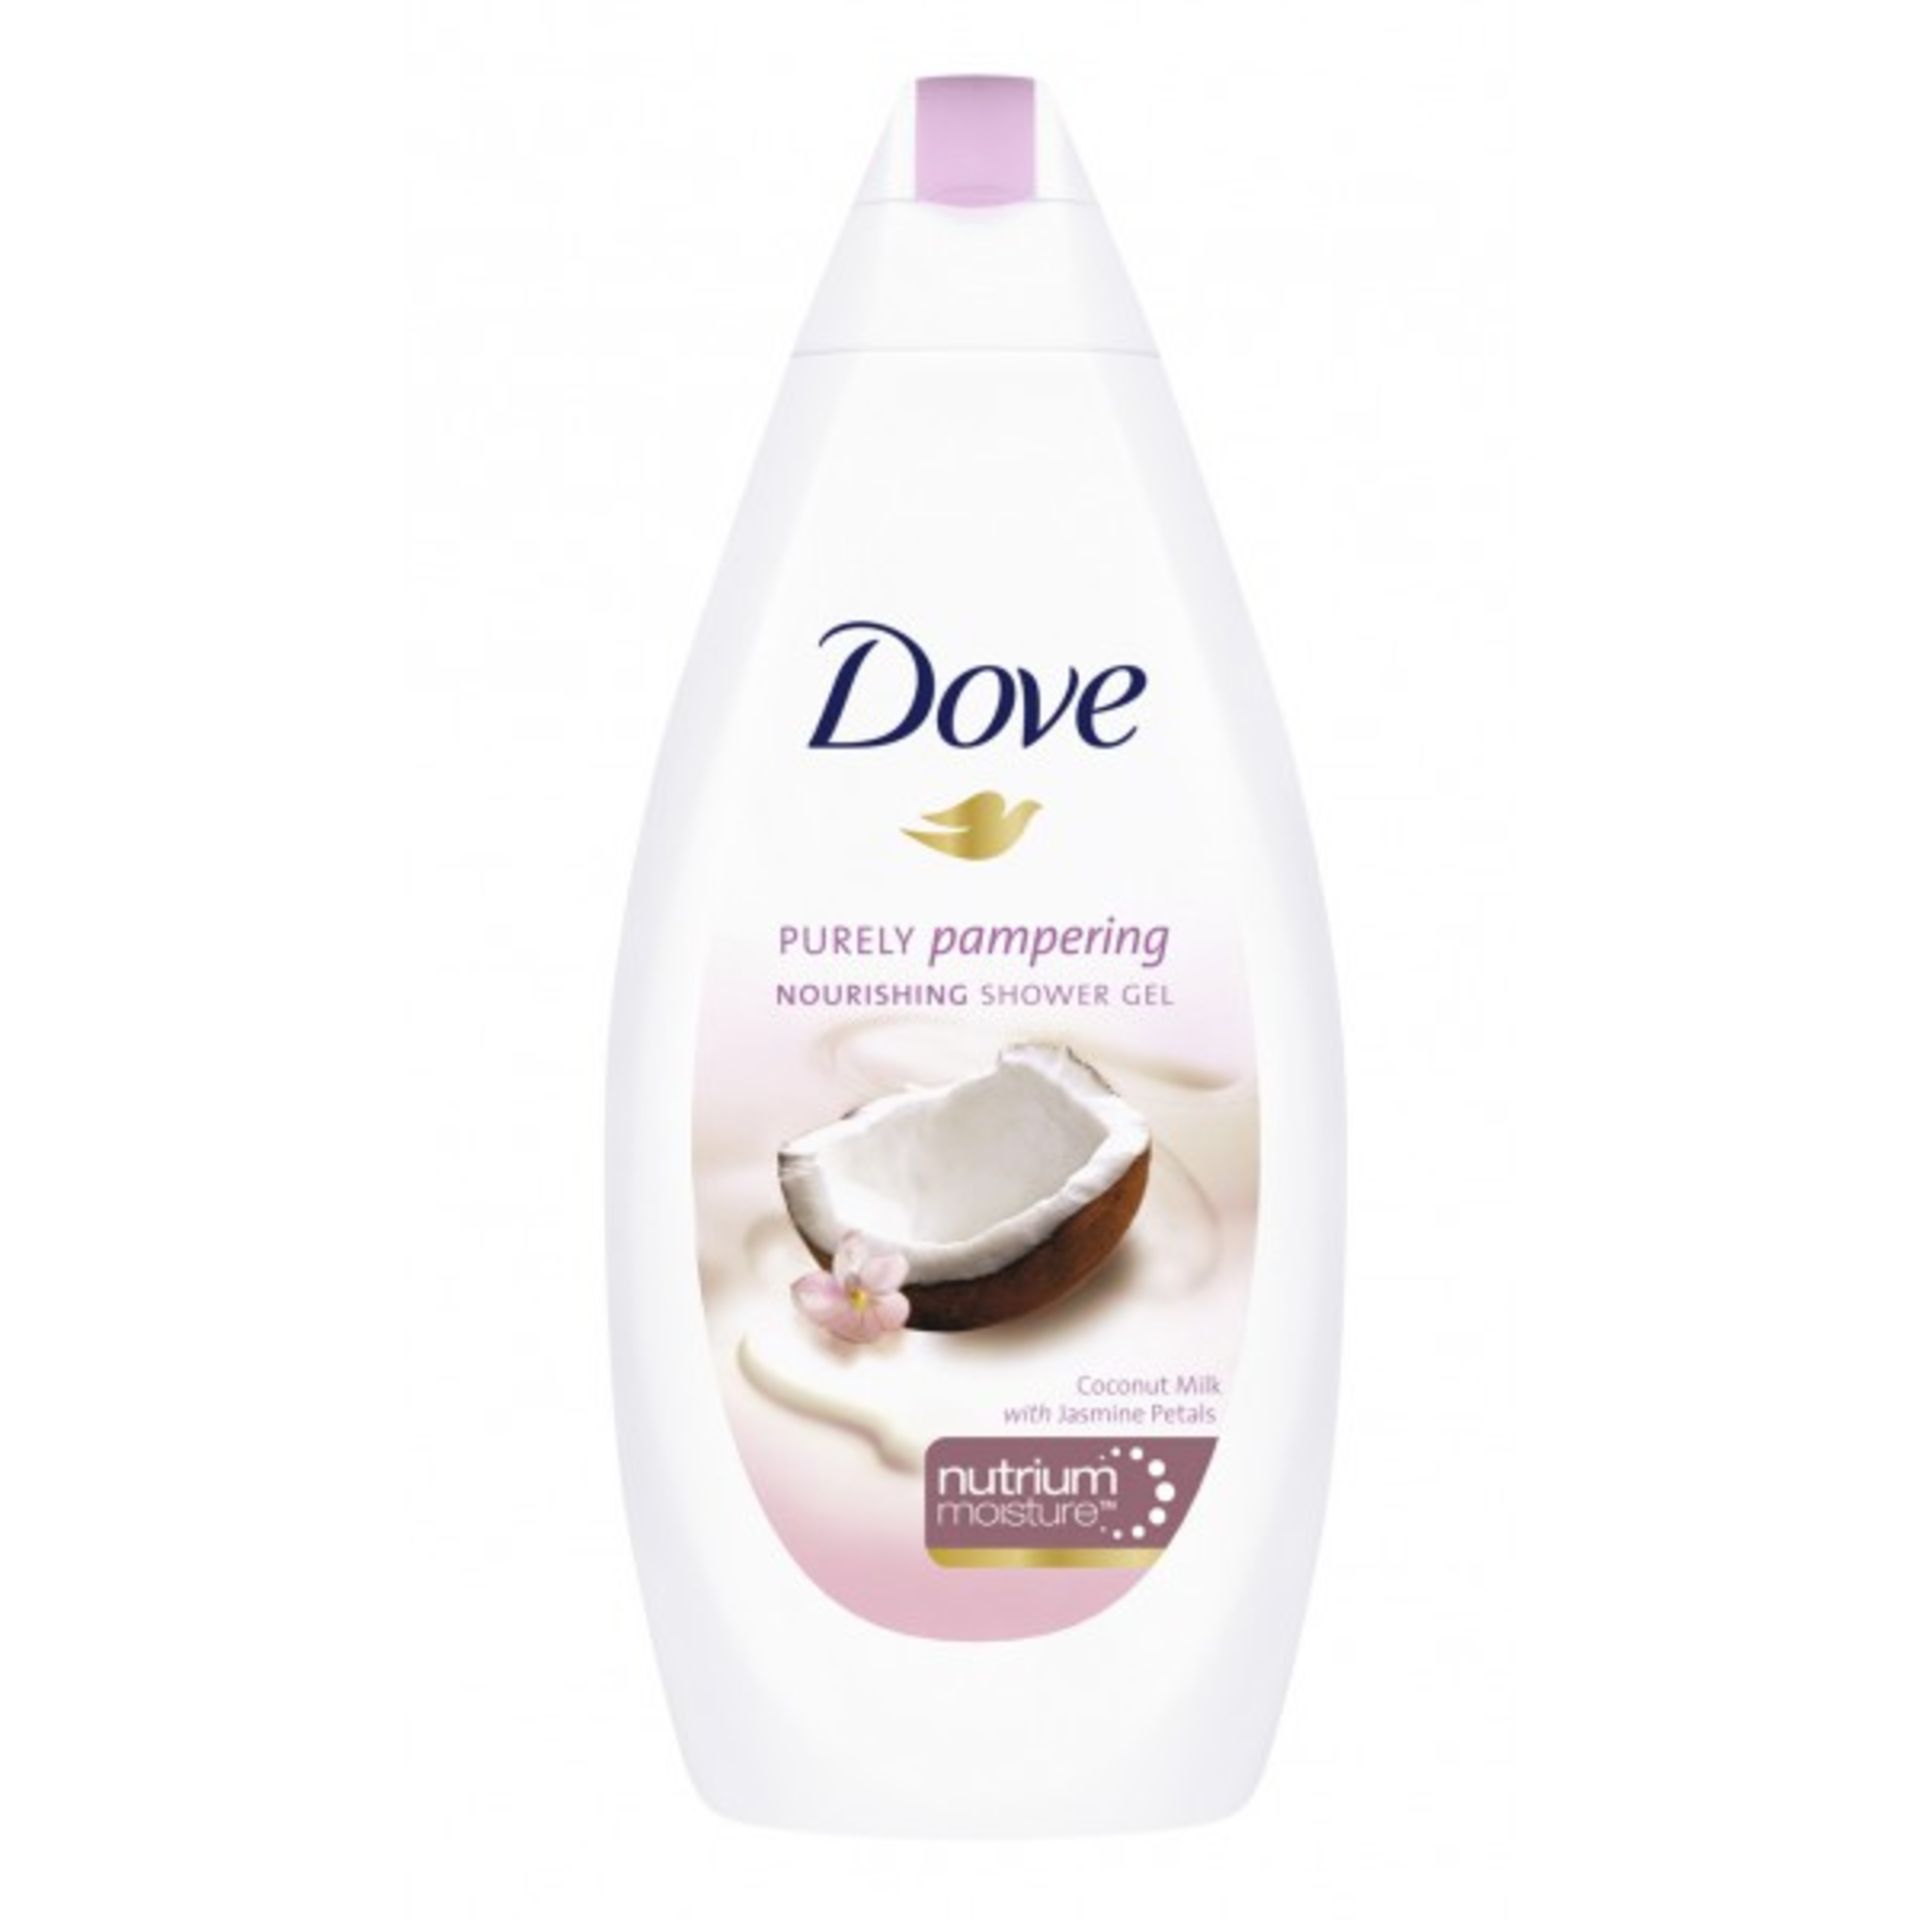 V Brand New 6 x 500ml Dove Purely Pampering Body Wash Tesco Price £23.40 for 6 X 2 YOUR BID PRICE TO